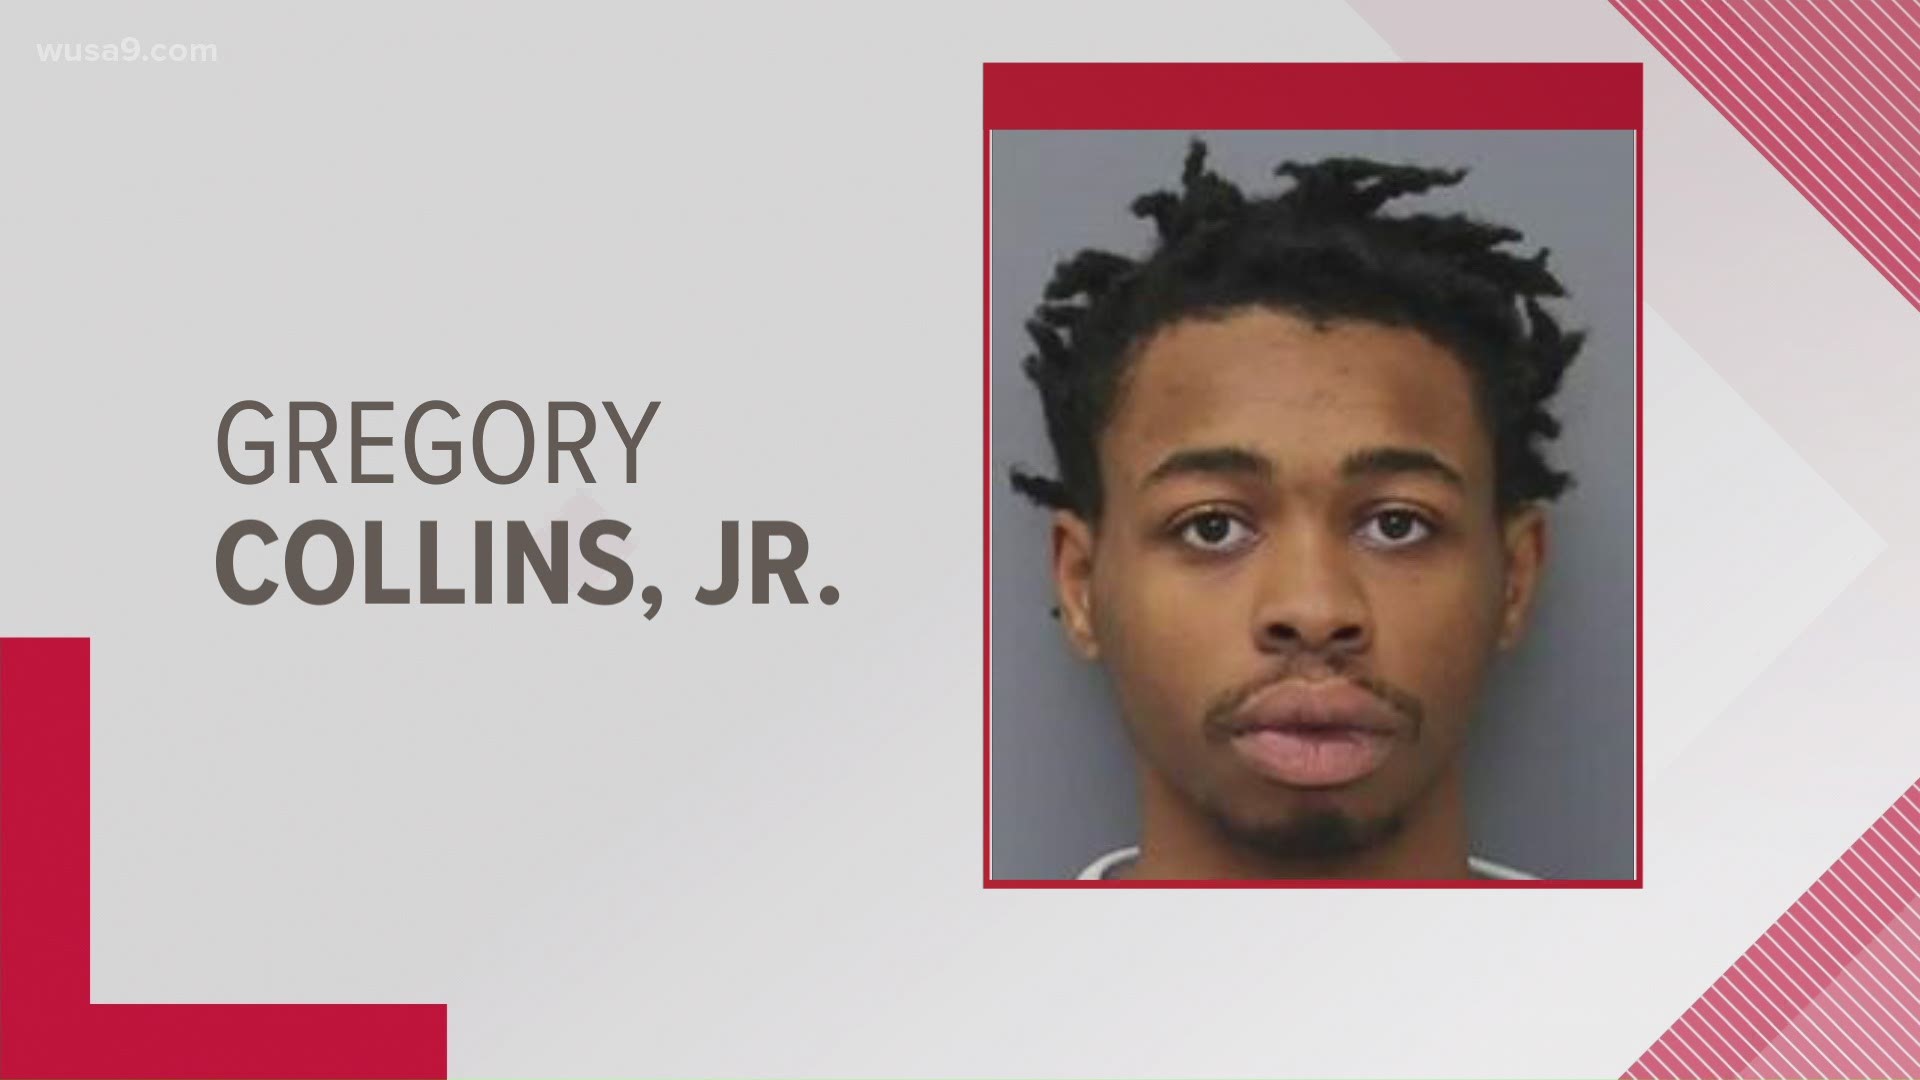 Gregory DeShawn Collins Jr. is awaiting extradition back to Maryland, where he will be served with an arrest warrant.